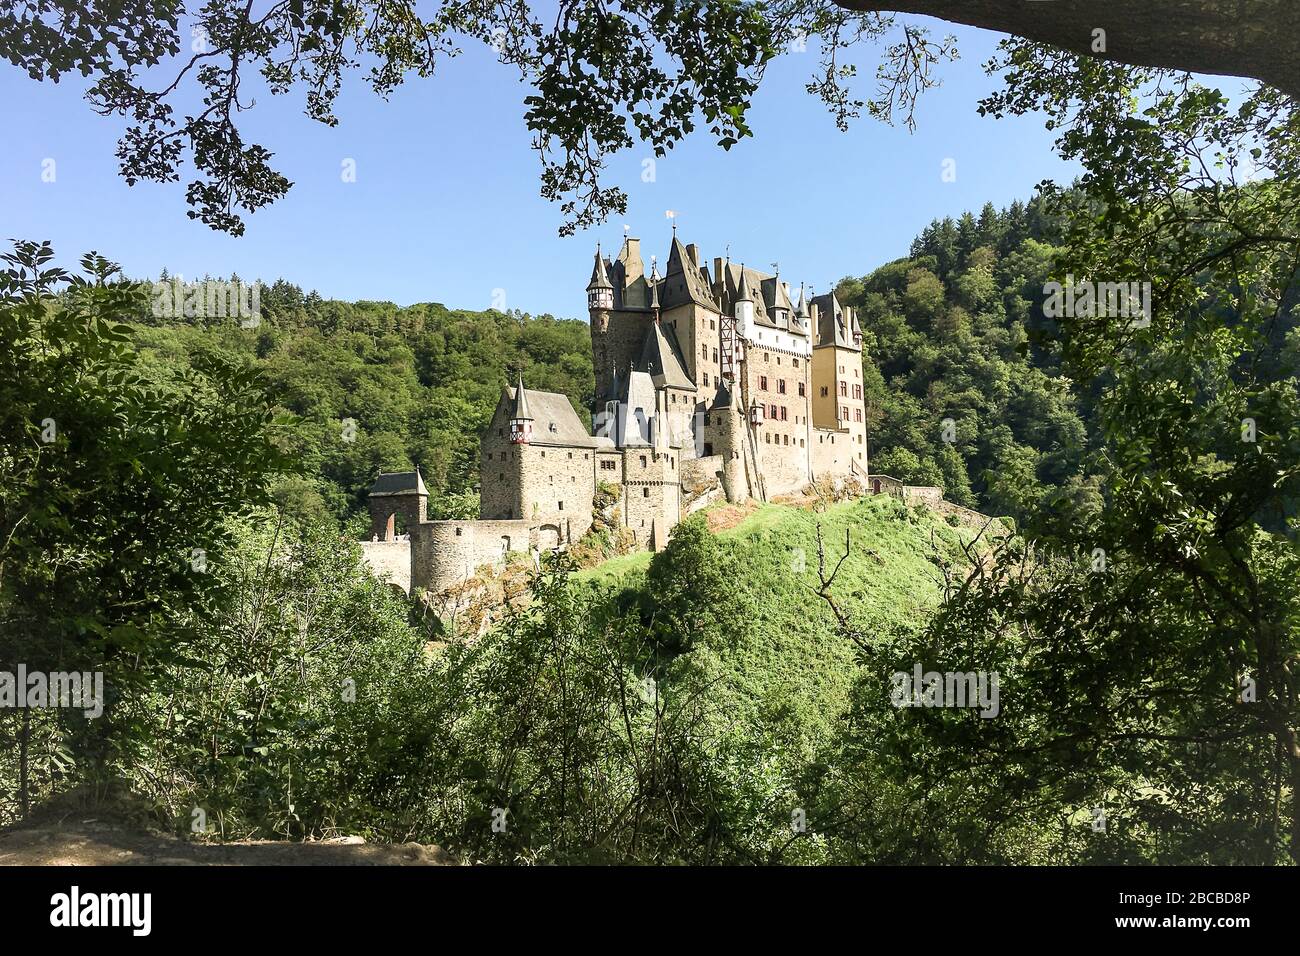 Looking at the western facade of Eltz Castle in Rhineland-Palatinate, Germany Stock Photo